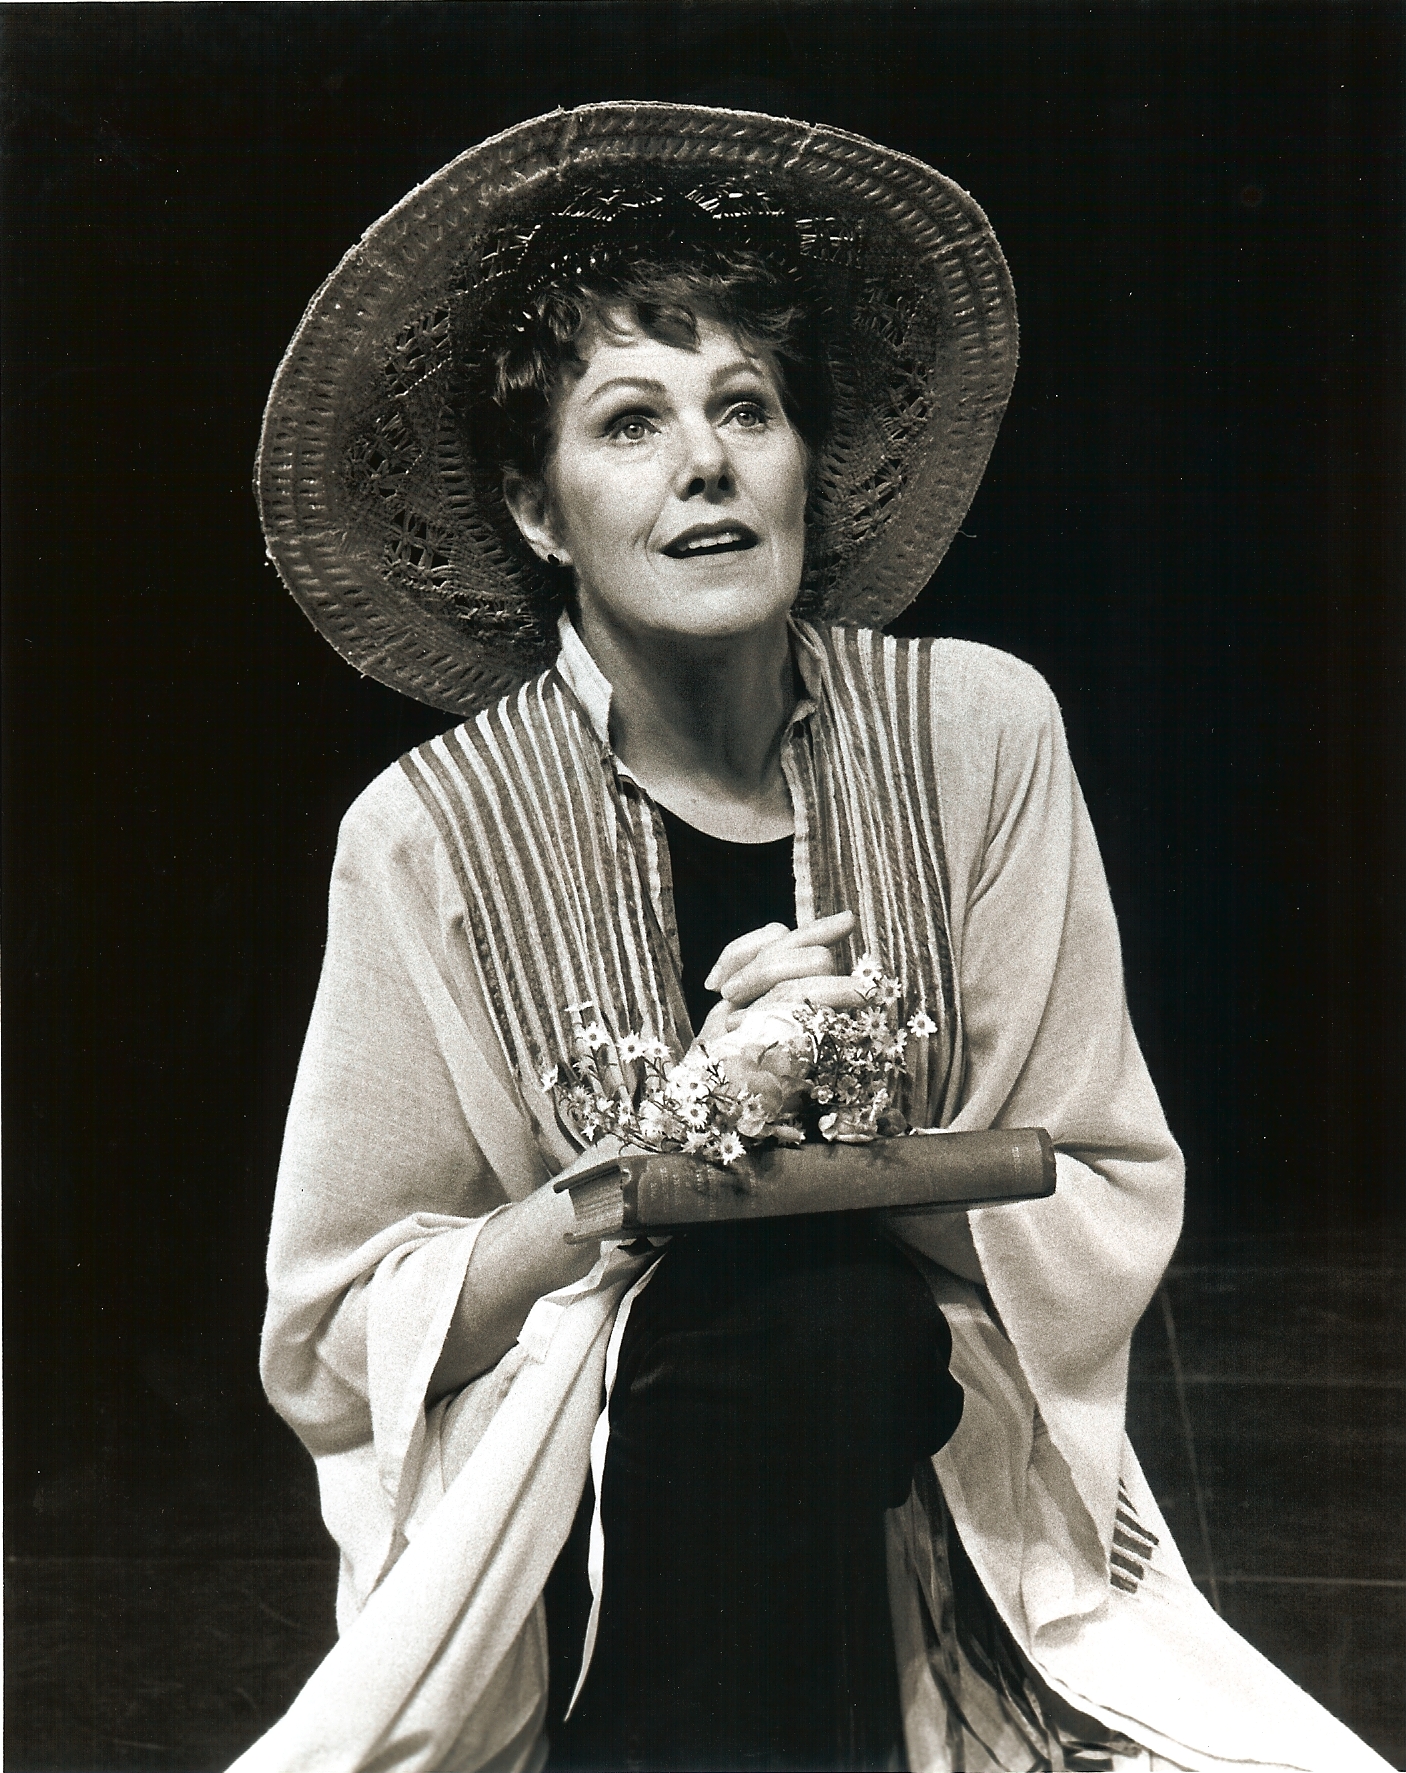 Personal to Lynn Redgrave for Shakespeare For My Father.